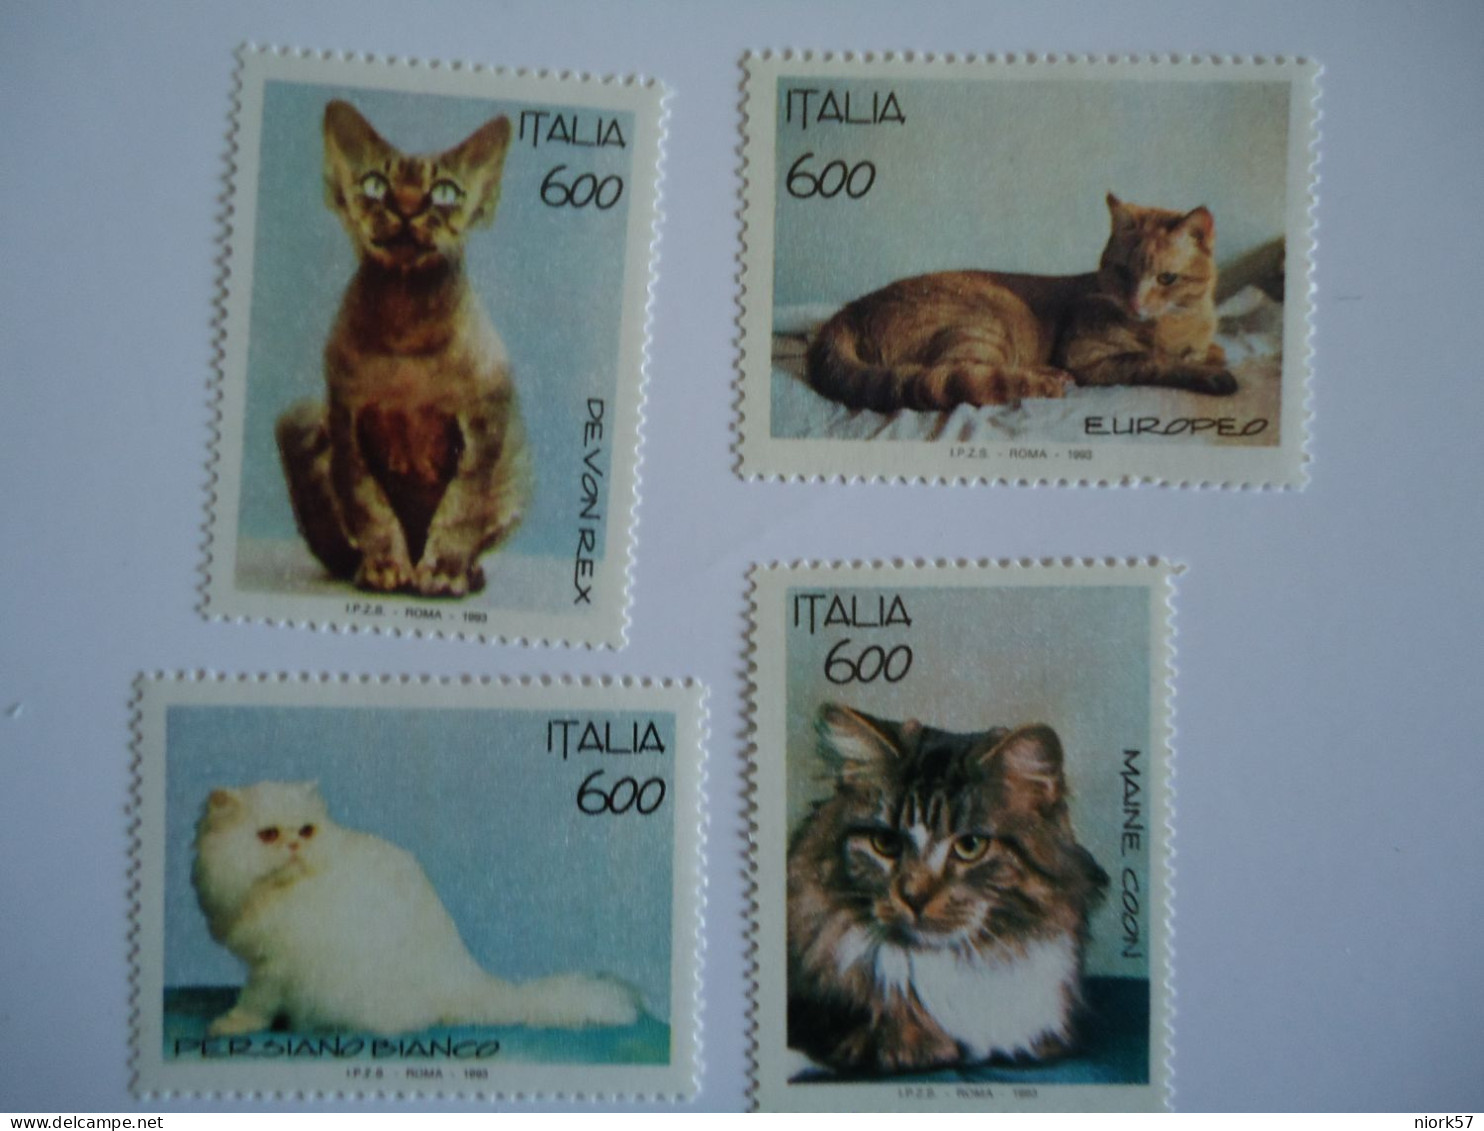 ITALY   MNH   4 STAMPS    ANIMALS  CAT CATS - Domestic Cats